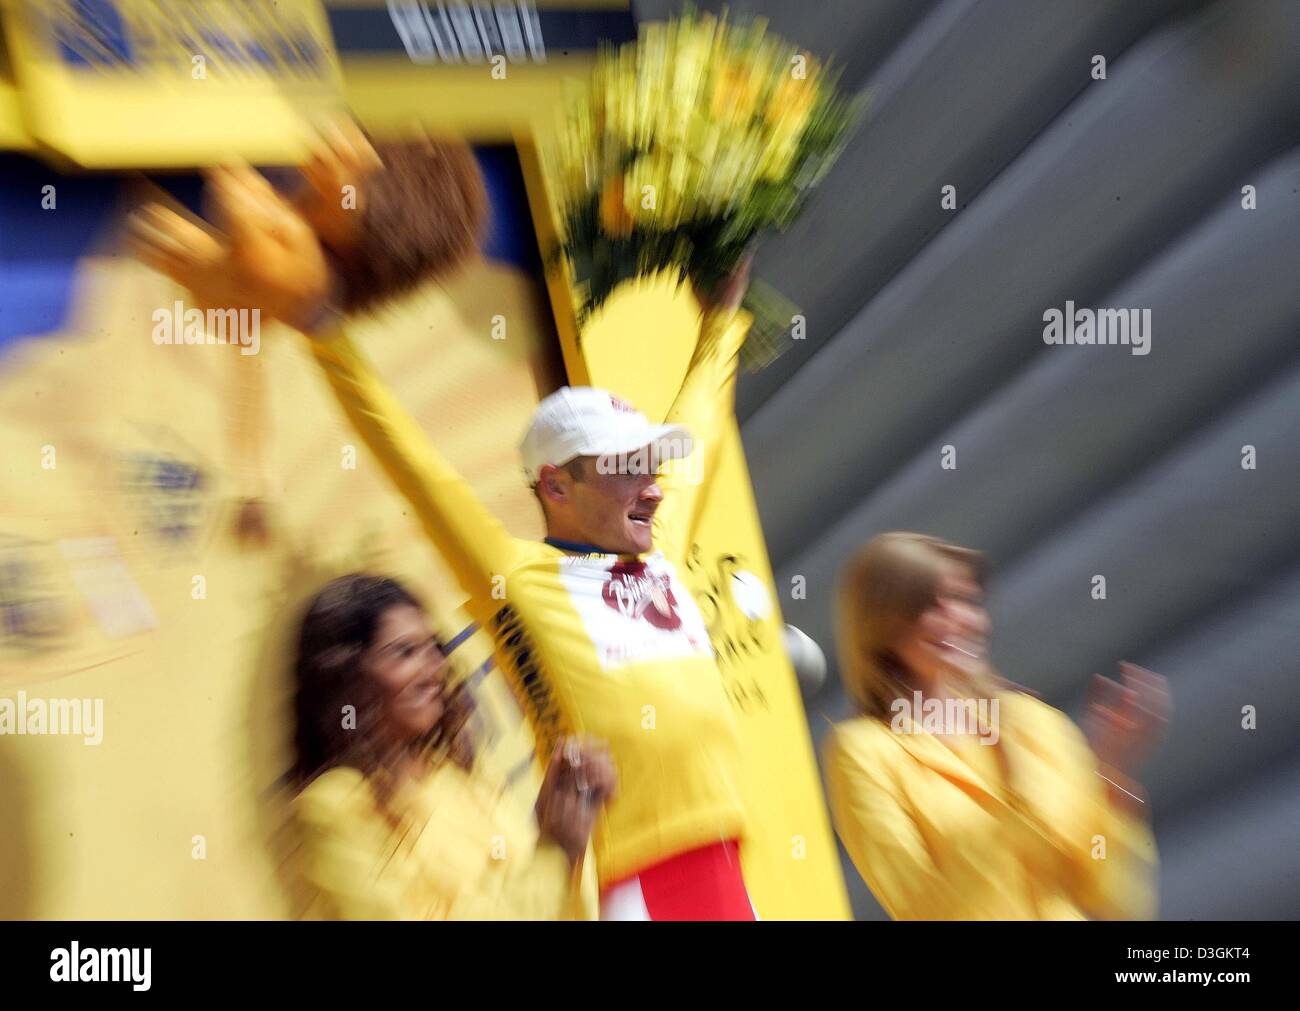 (dpa) - 25-year-old French cyclist Thomas Voeckler of team Brioches La Boulangere celebrates on the podium after putting on the race leader's yellow jersey after the ninth stage of the Tour de France cycling race in Gueret, France, 13 July 2004. The 160.5km long stage took the cyclists from Saint-Leonard-de-Noblat to Gueret. During the 10th stage Voeckler wears the yellow jersey fo Stock Photo